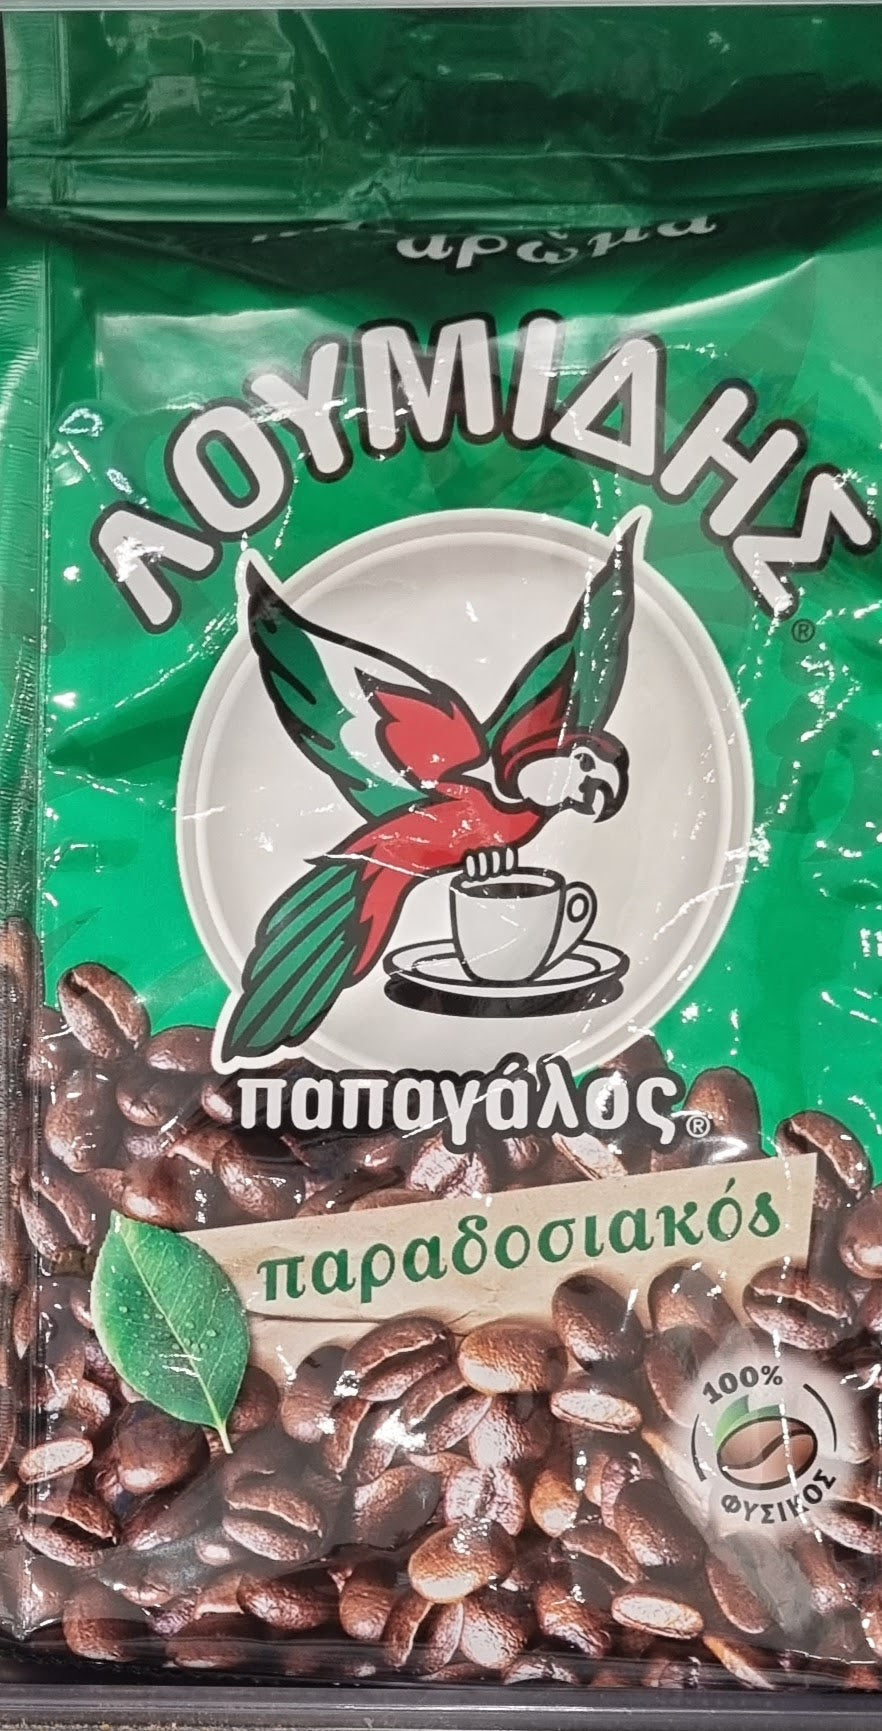 Loumides Papagalos Greek Classic Coffee - buy online and ship to US and worldwide